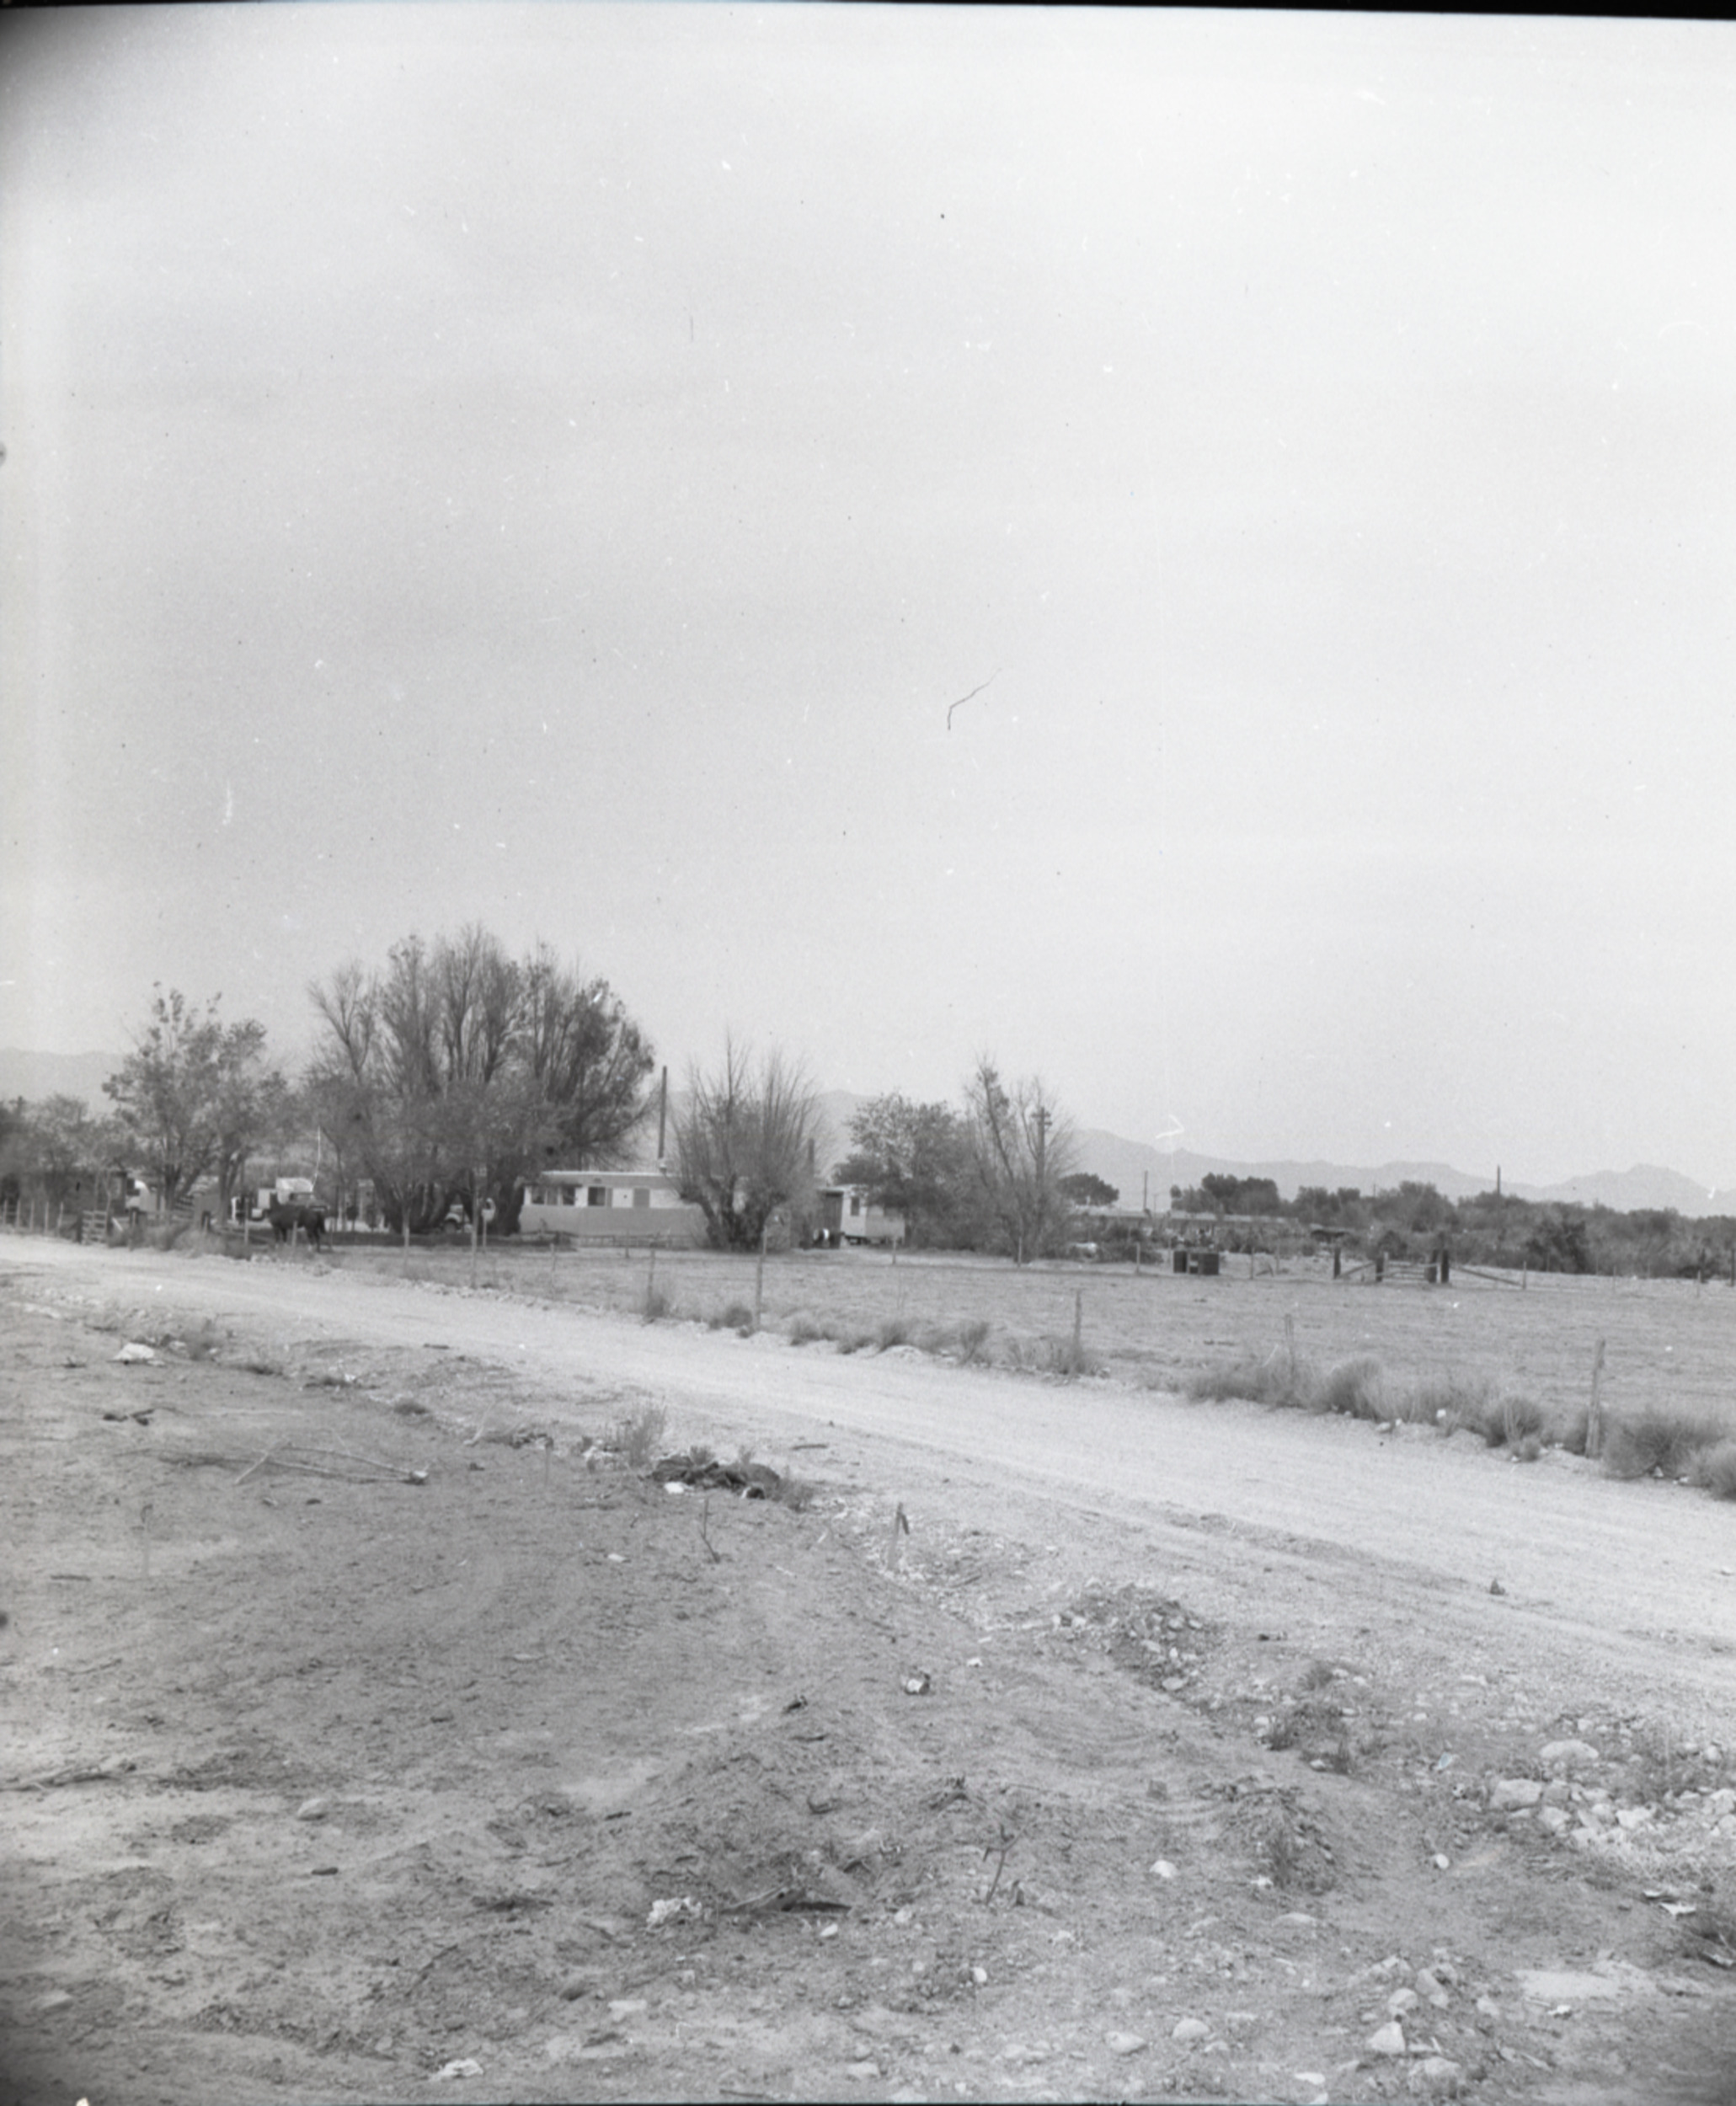 Gerson Housing project land, Image 01